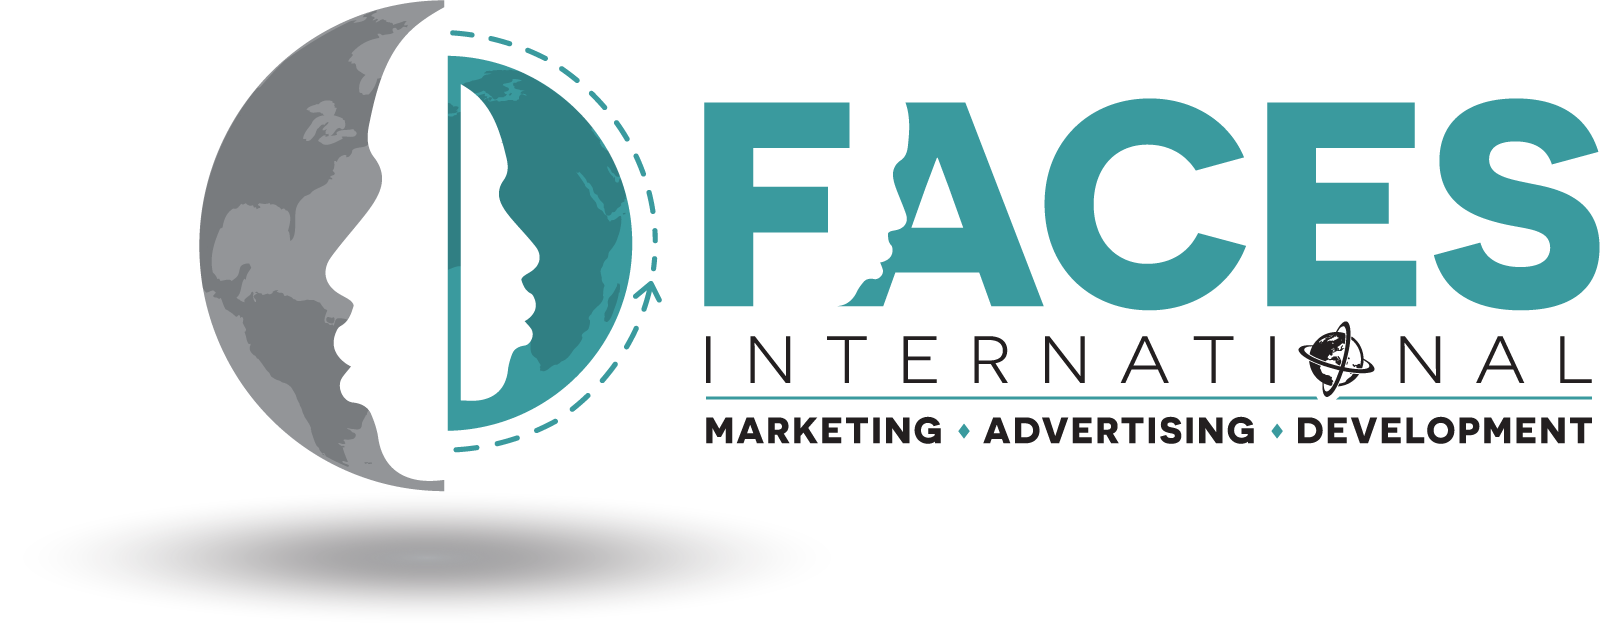 Integrated Corporate Growth & Business Consultancy | Faces International